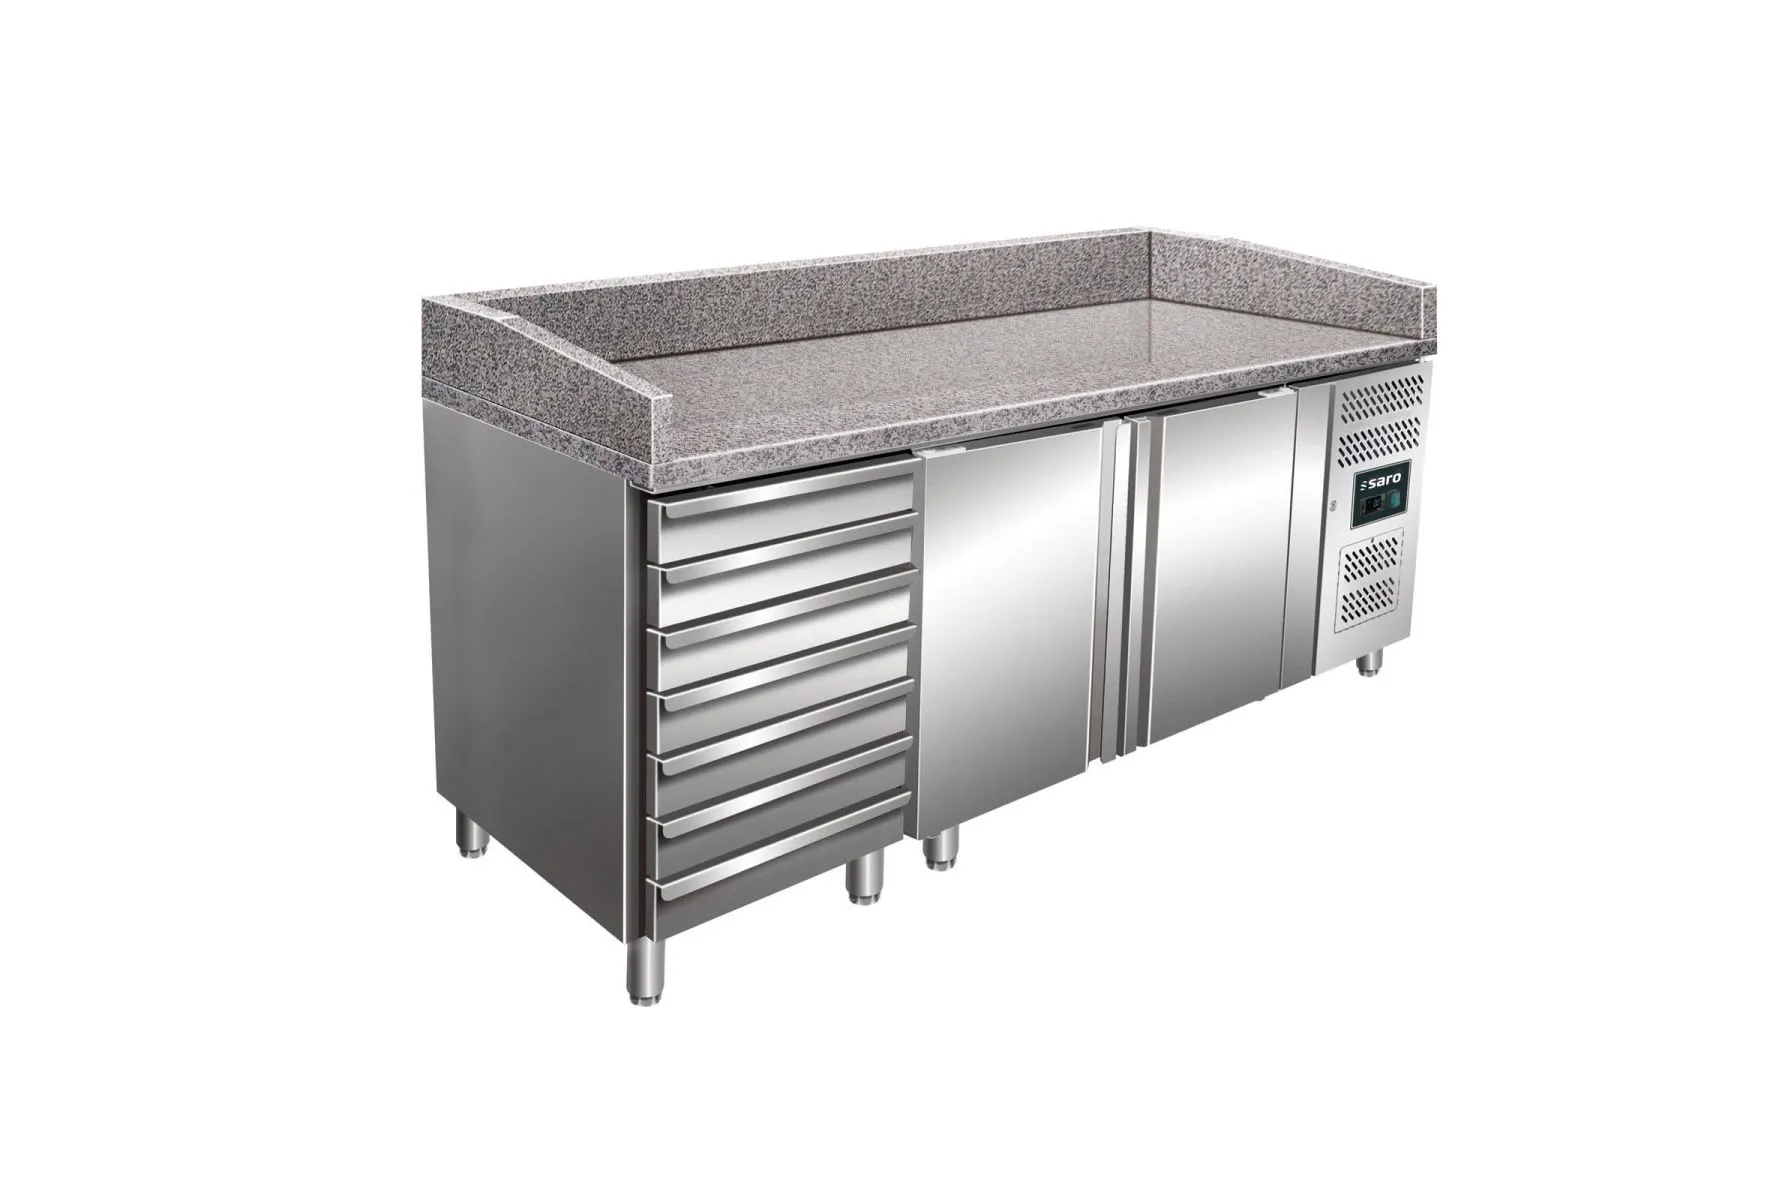 Saro Pizza preparation table with drawers Model MARGA P 2 Doors